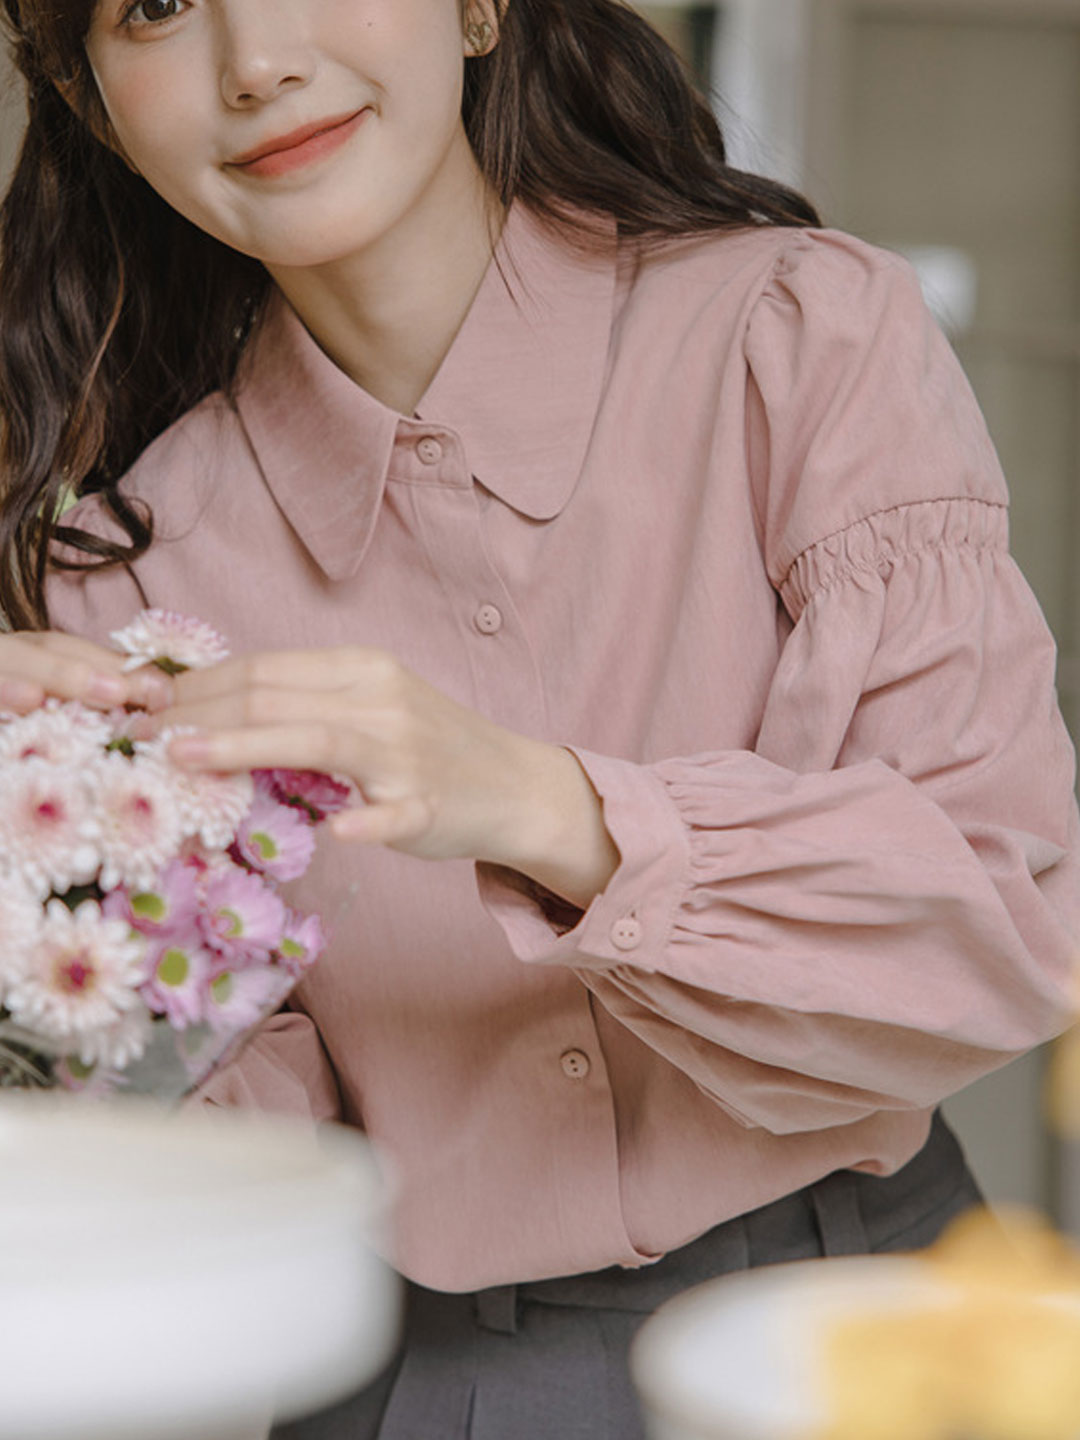 Claire Loose Solid Color Lapel Lantern Sleeve Shirt